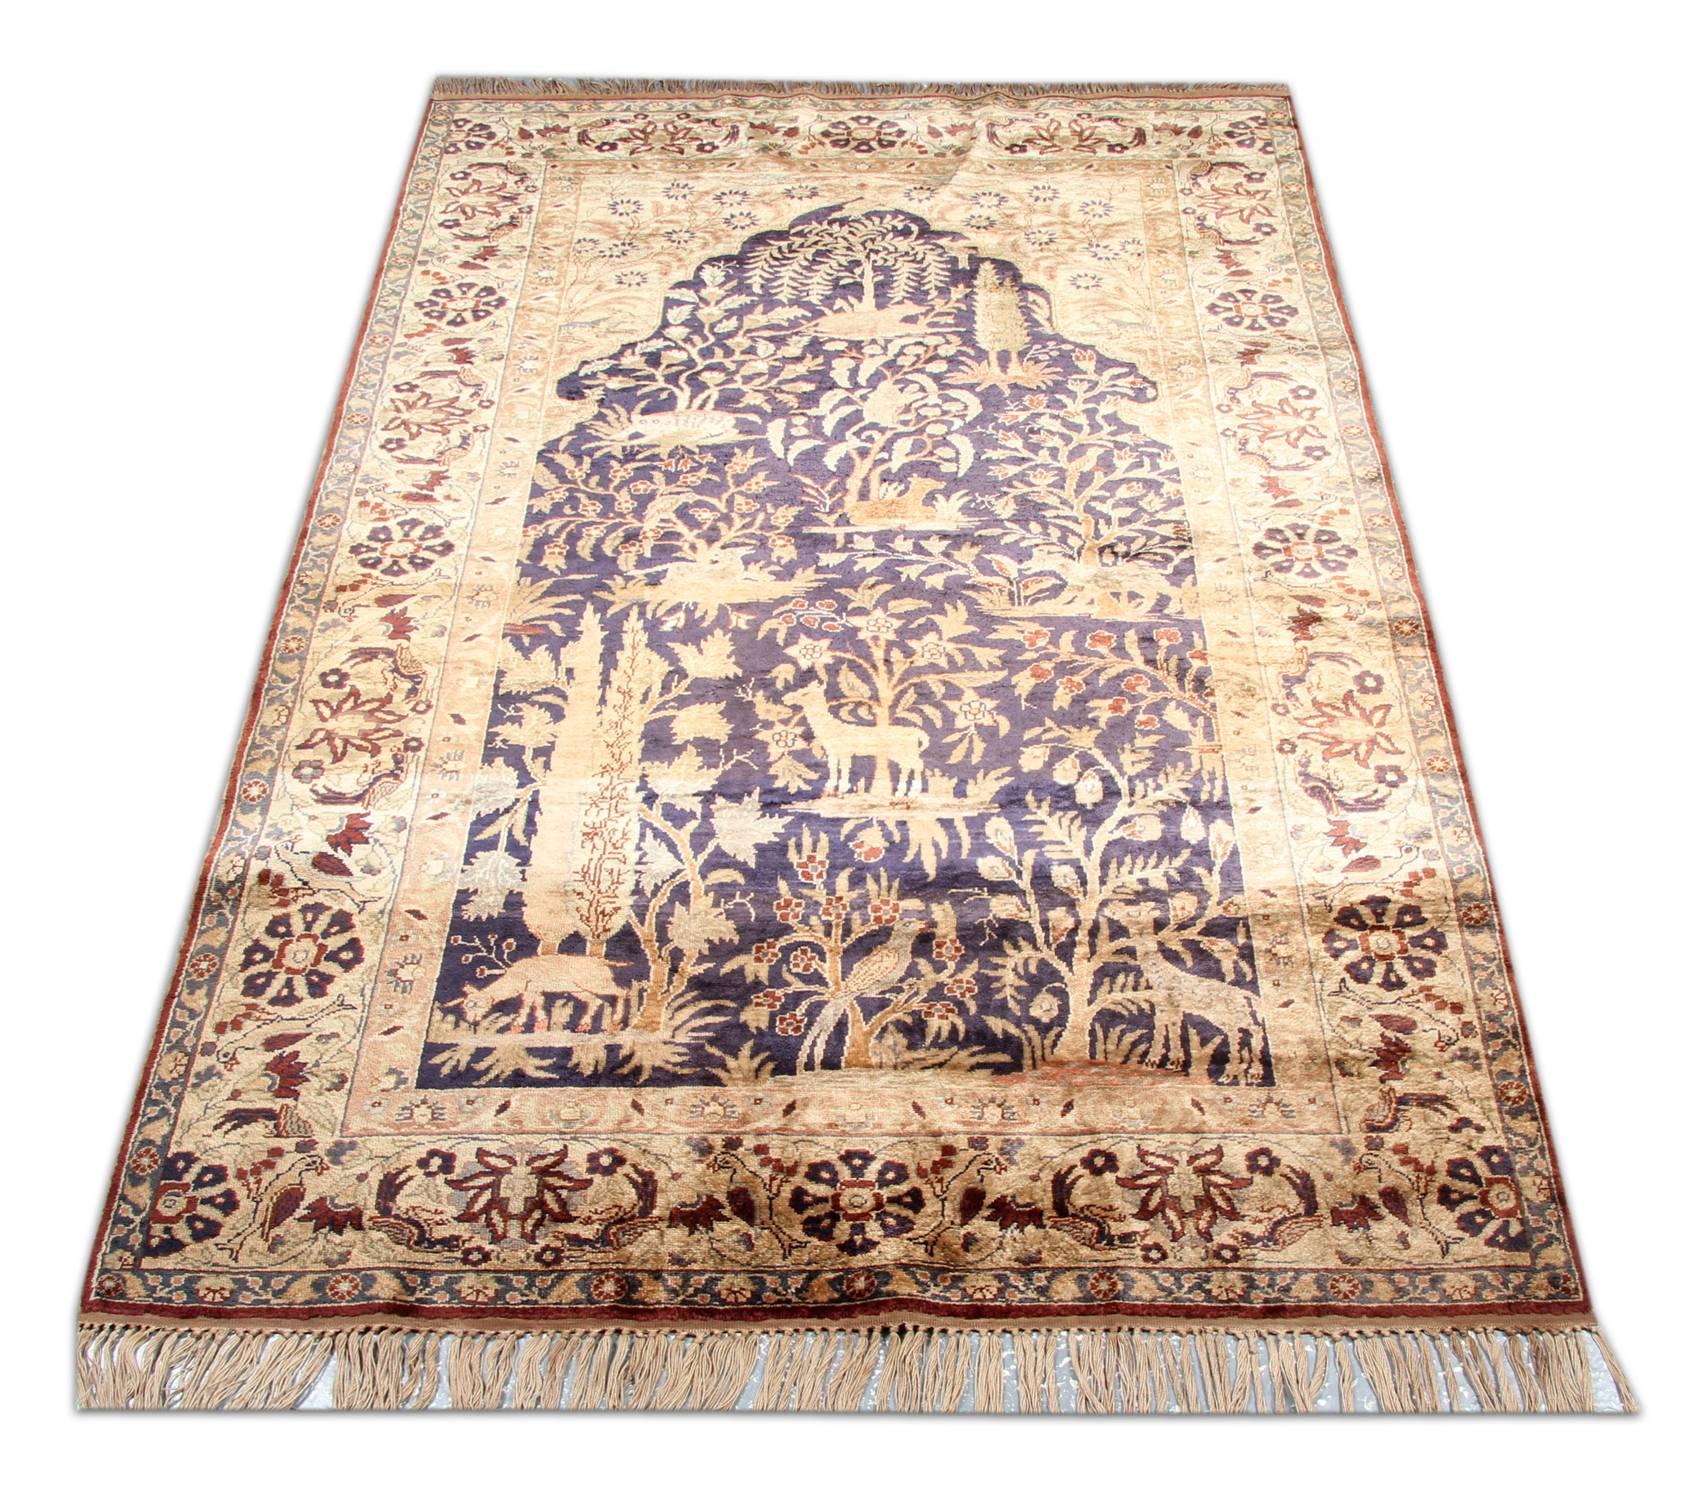 A finely hand-knotted vintage Central Anatolian golden purple rug with a Classic all-over paradise design of small patterns. The high-quality wool pile on strong silk foundation of this gold rug and excellent original condition let this floral rug